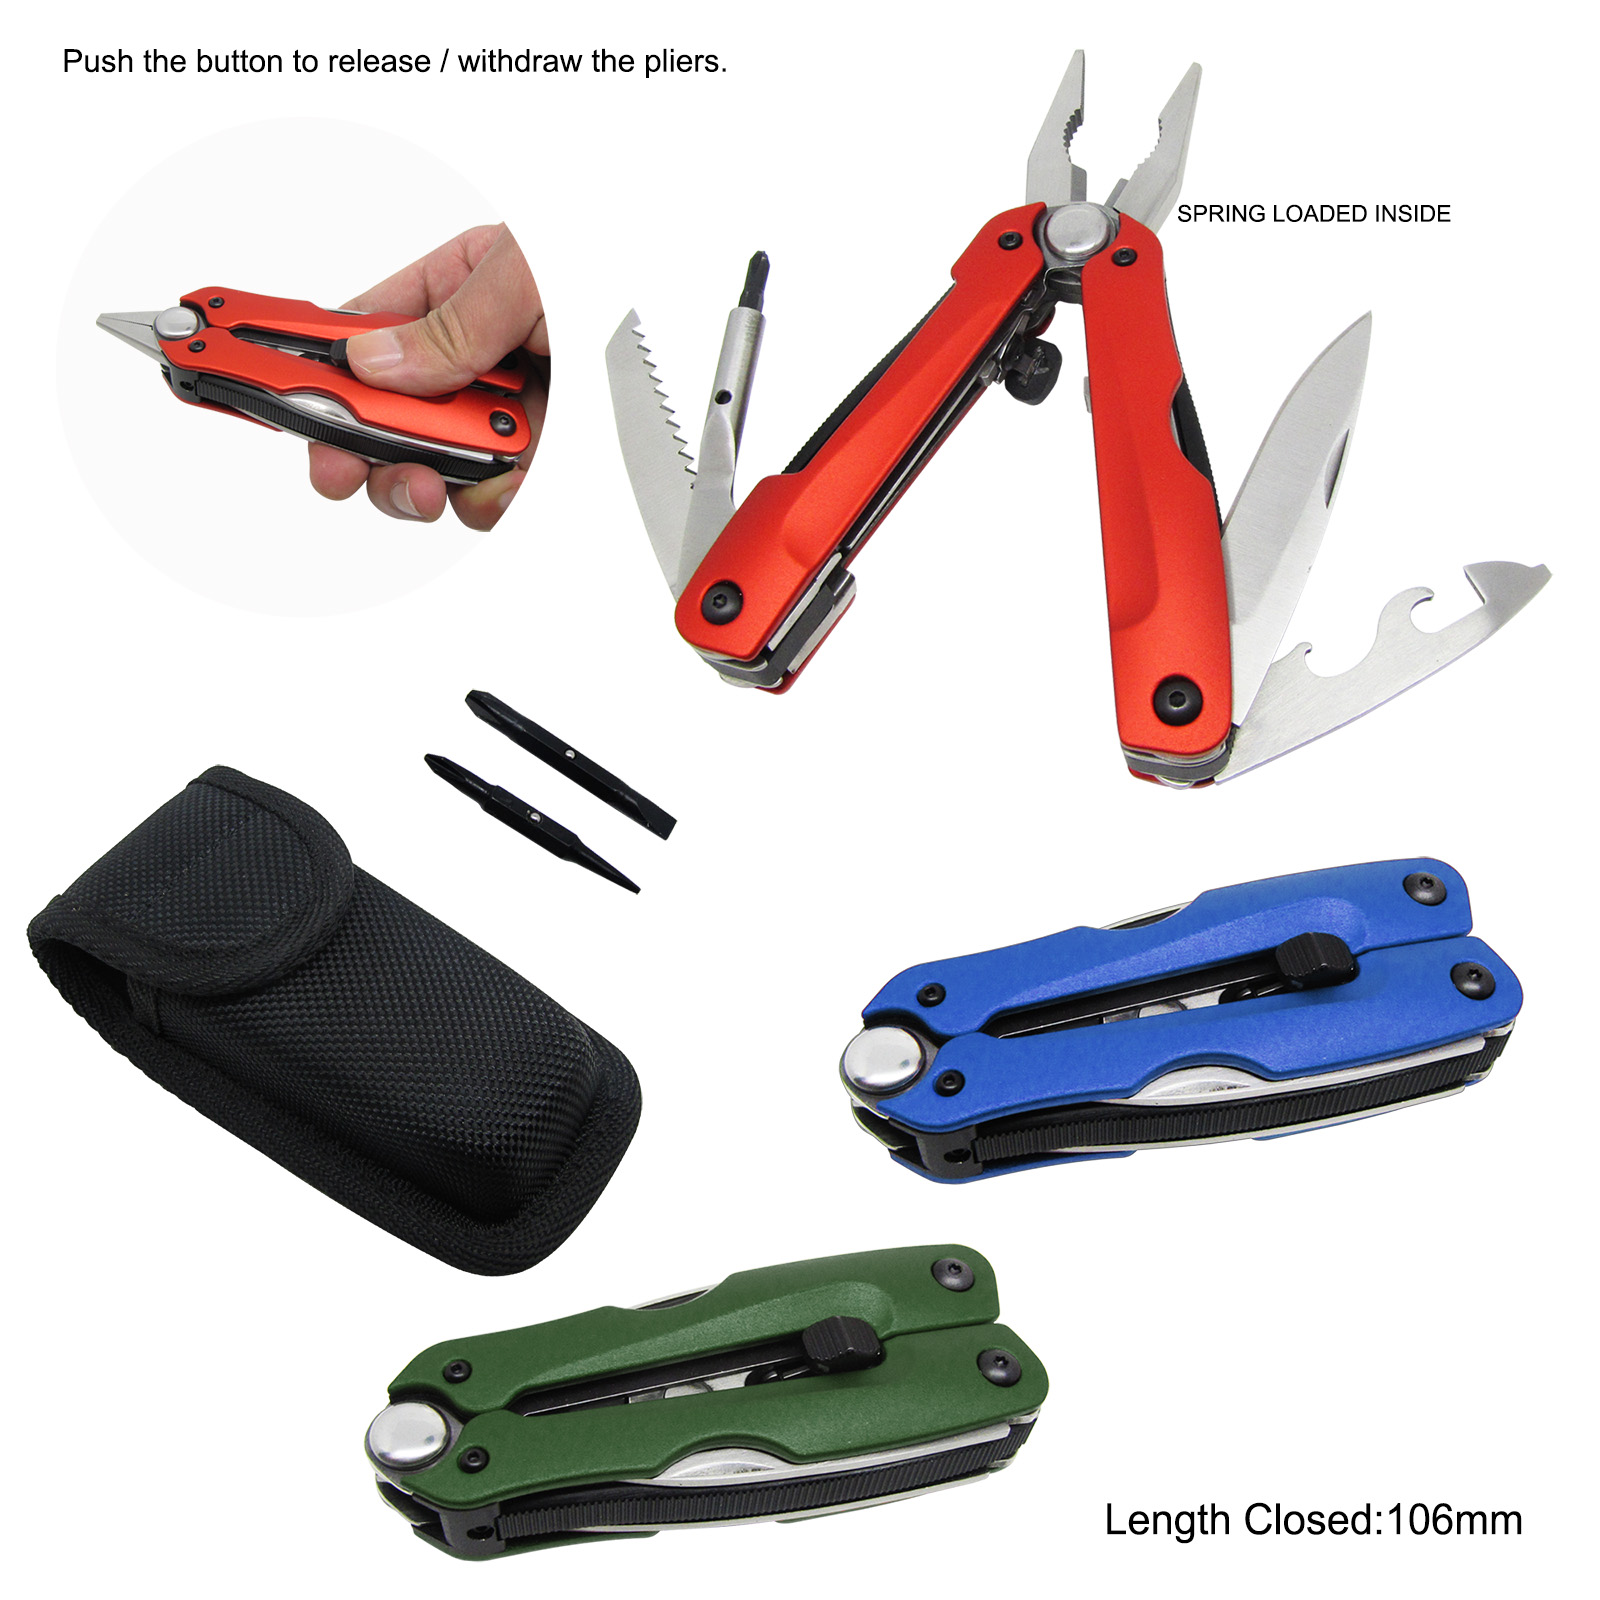 #8208 Highest Quality Multitool with Sliding Pliers